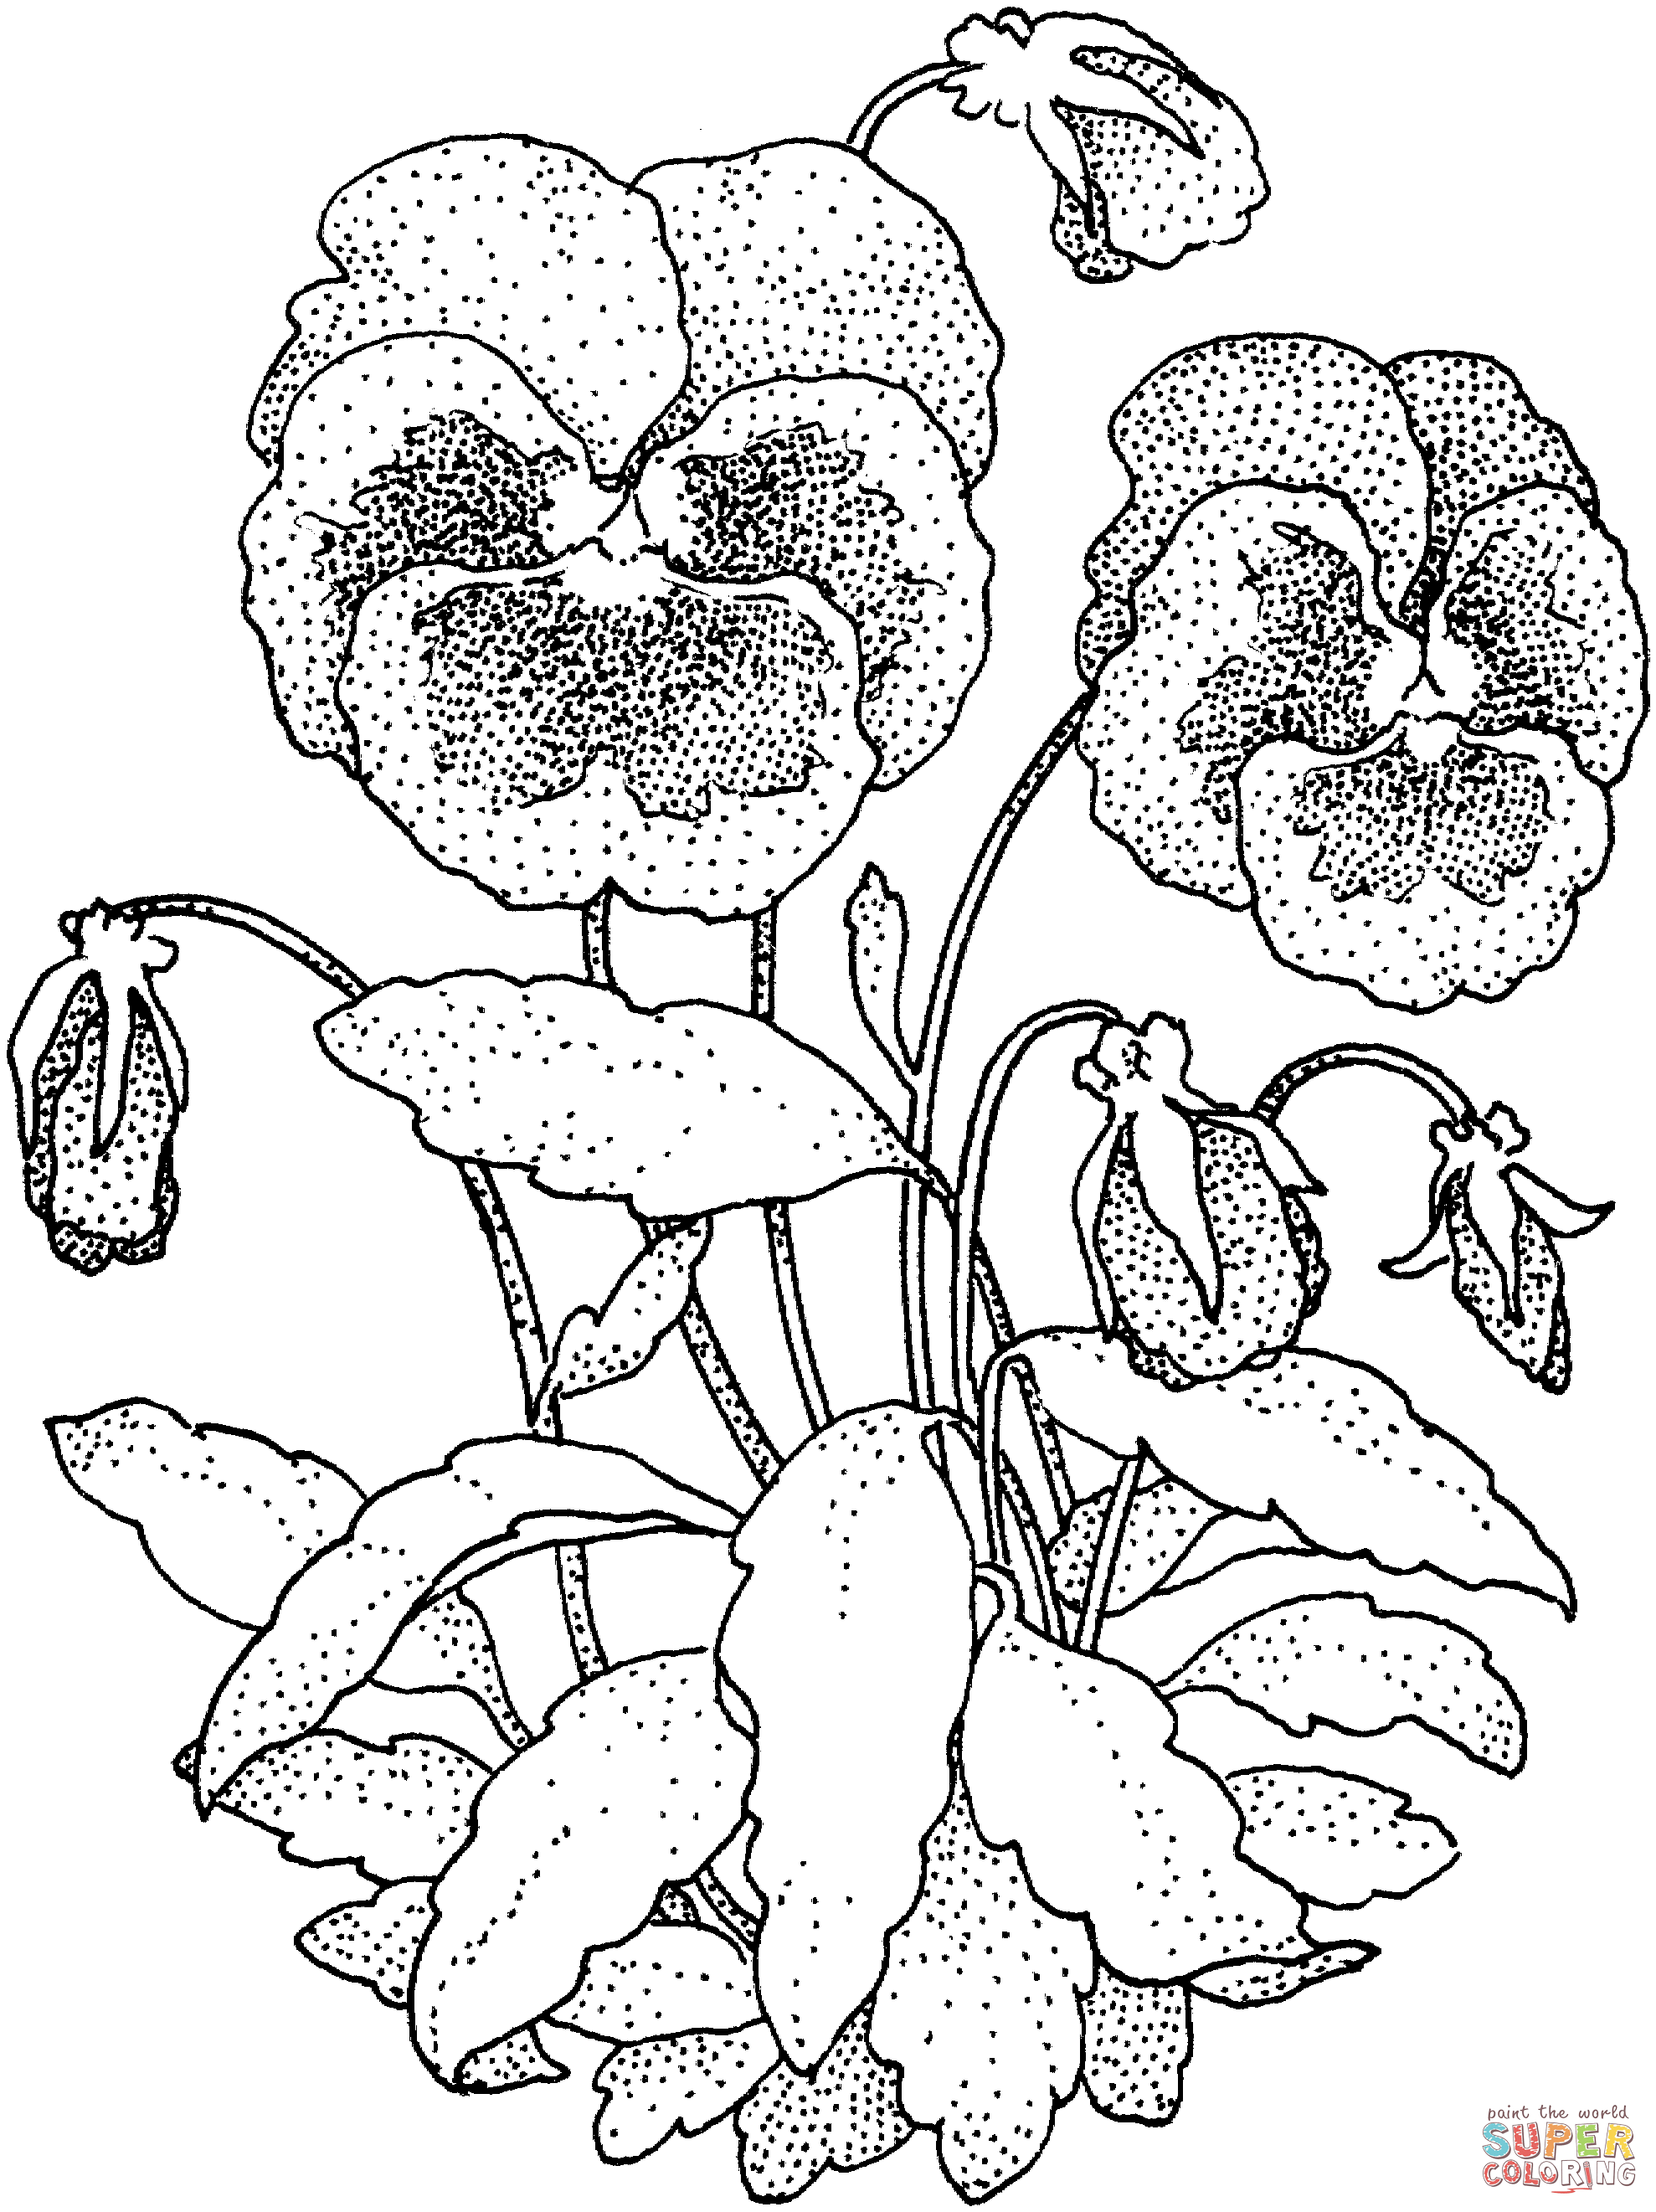 Pansy coloring #5, Download drawings